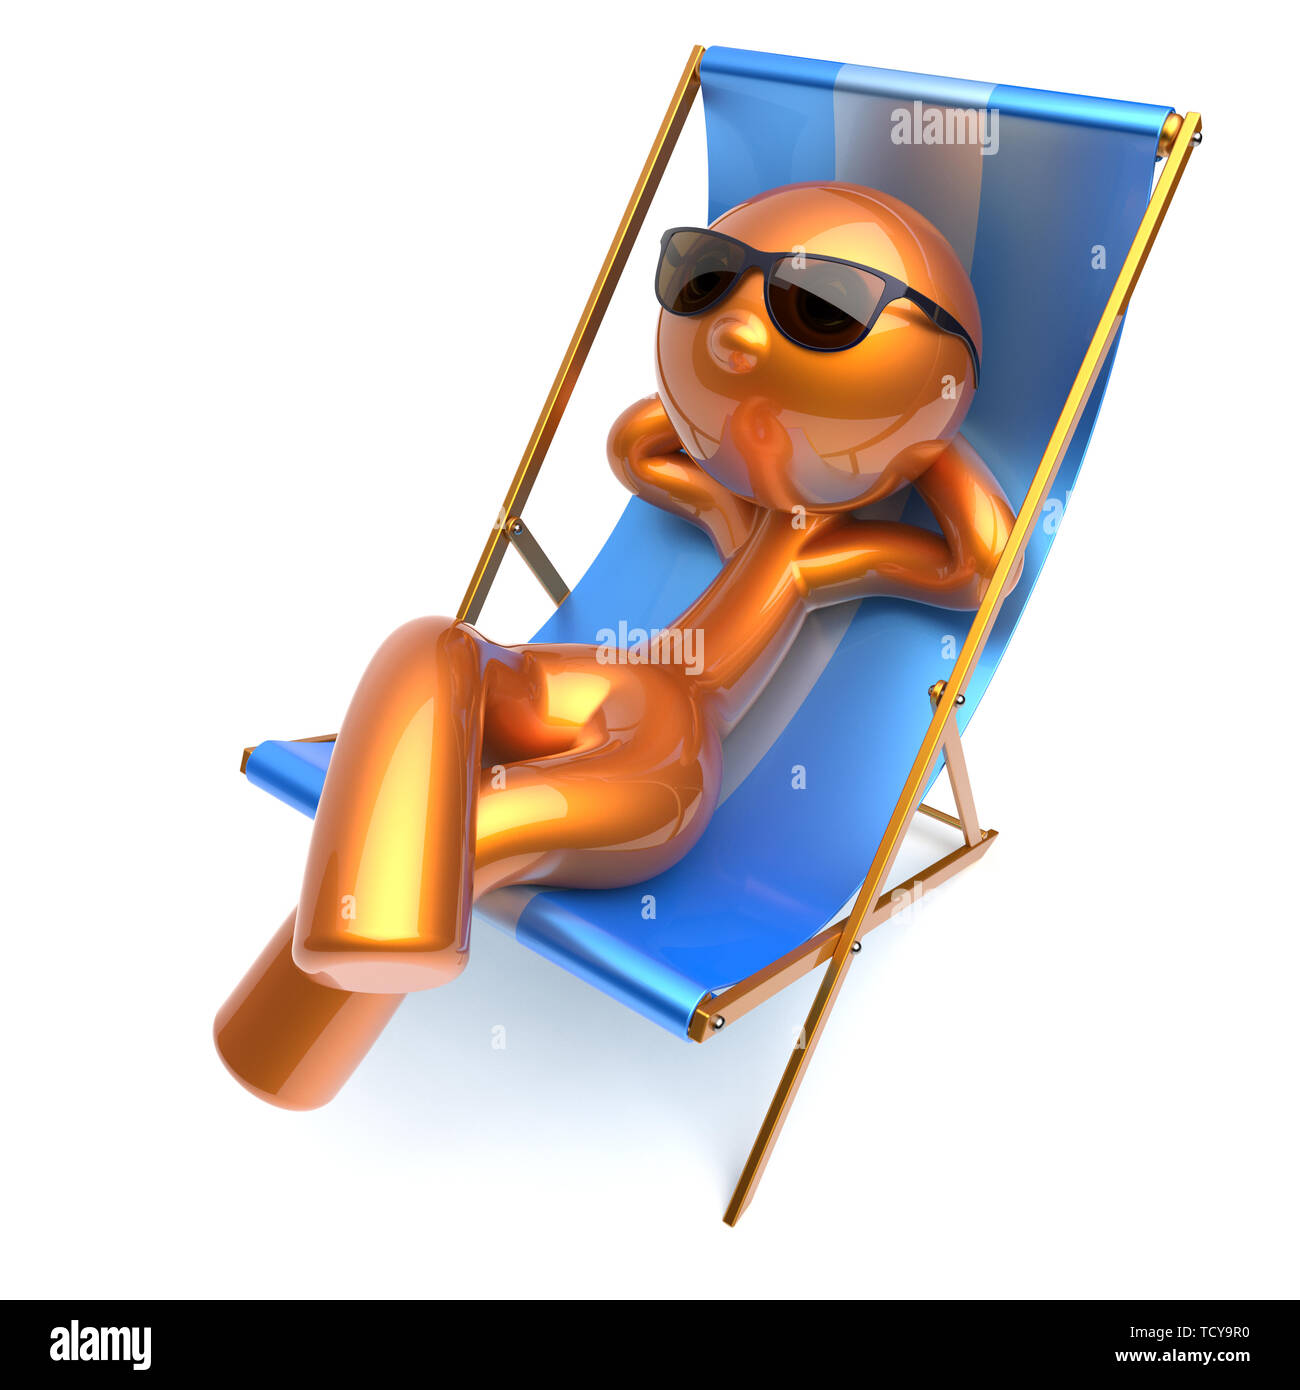 Man relaxing carefree stylized character chilling beach deck chair  sunglasses summer comfort golden cartoon person sun lounger chaise lounge  tourist s Stock Photo - Alamy